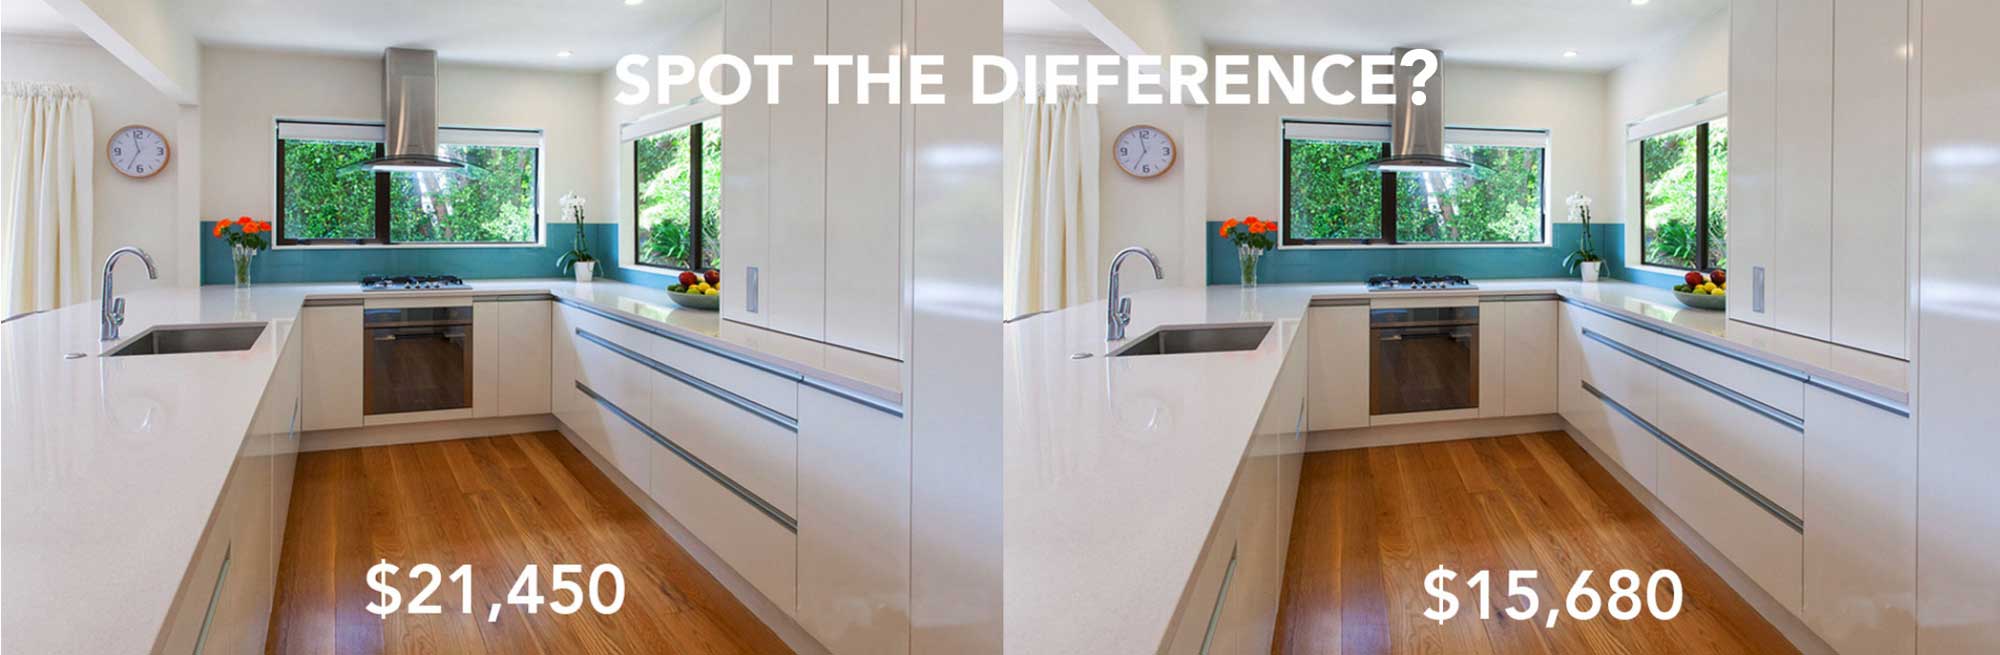 Spot the difference between these two kitchens.